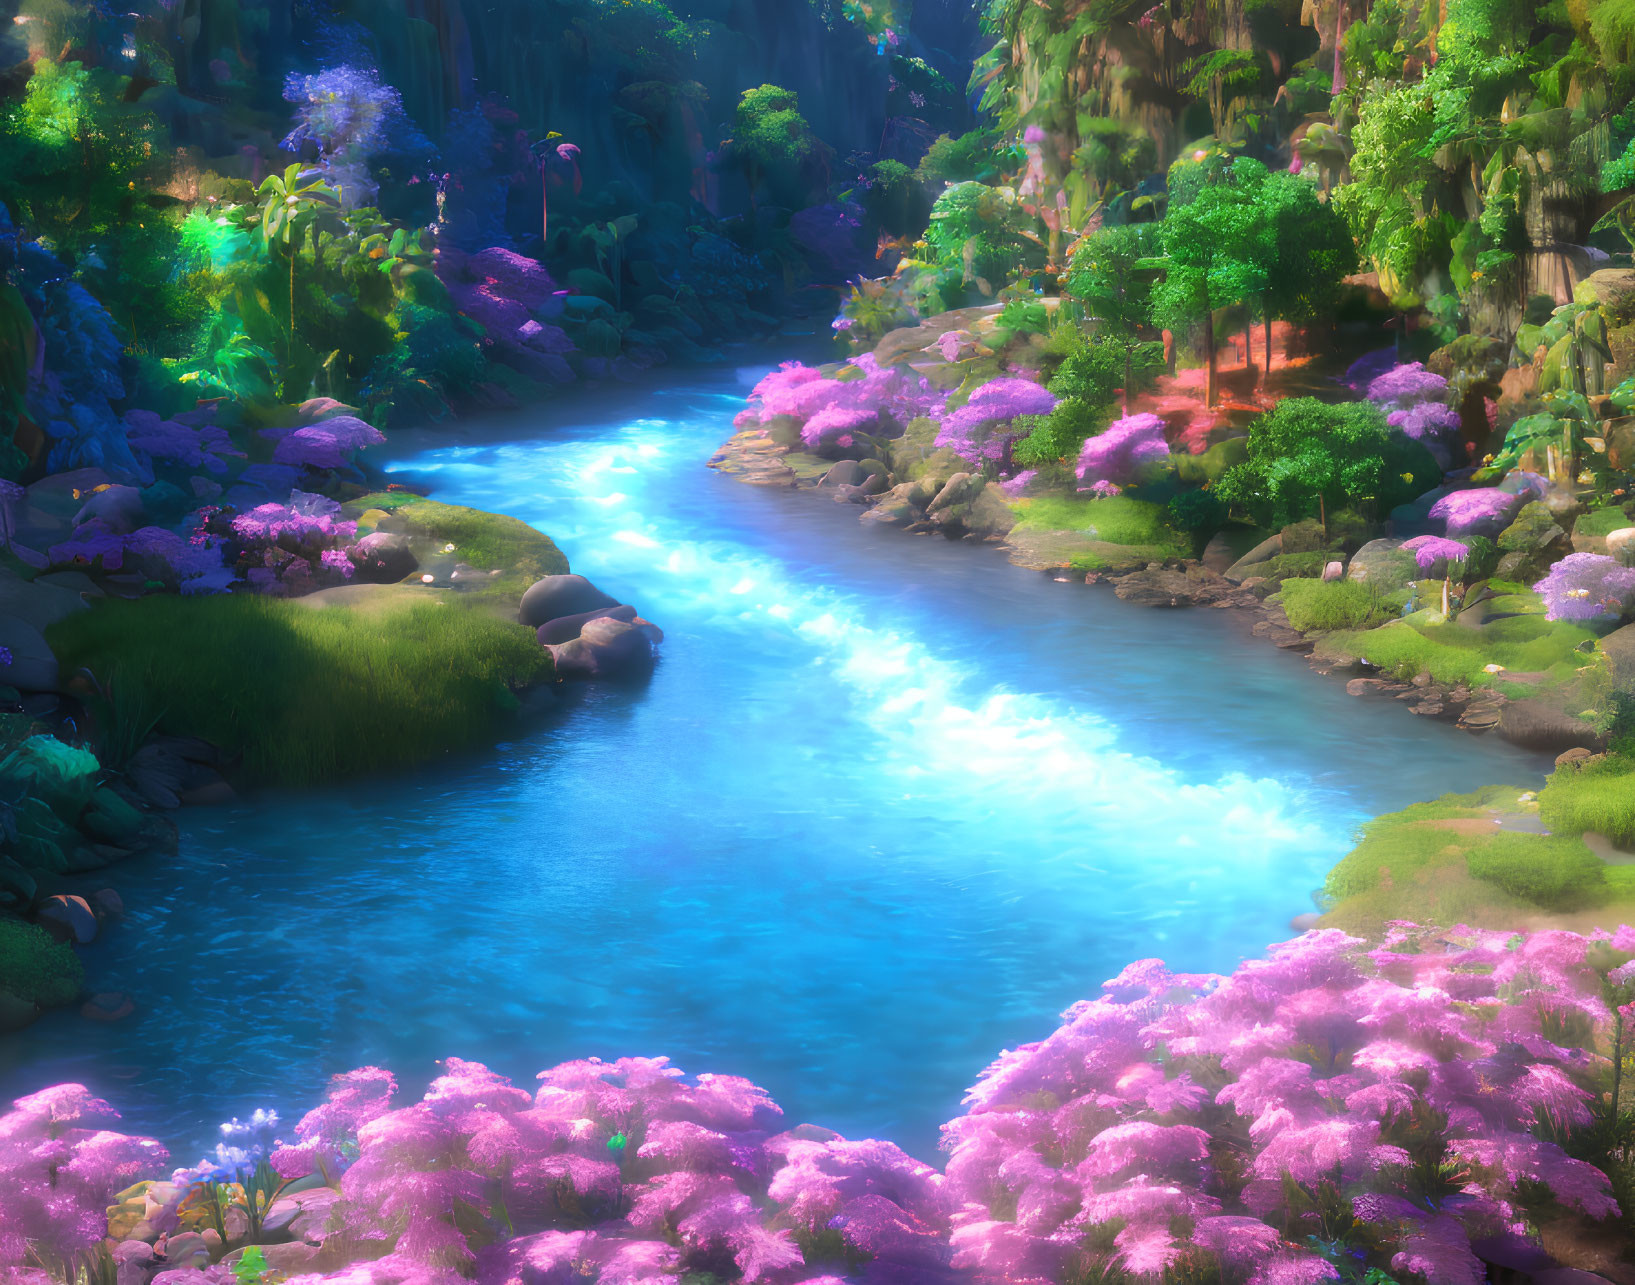 Vibrant river in magical forest with pink and purple foliage